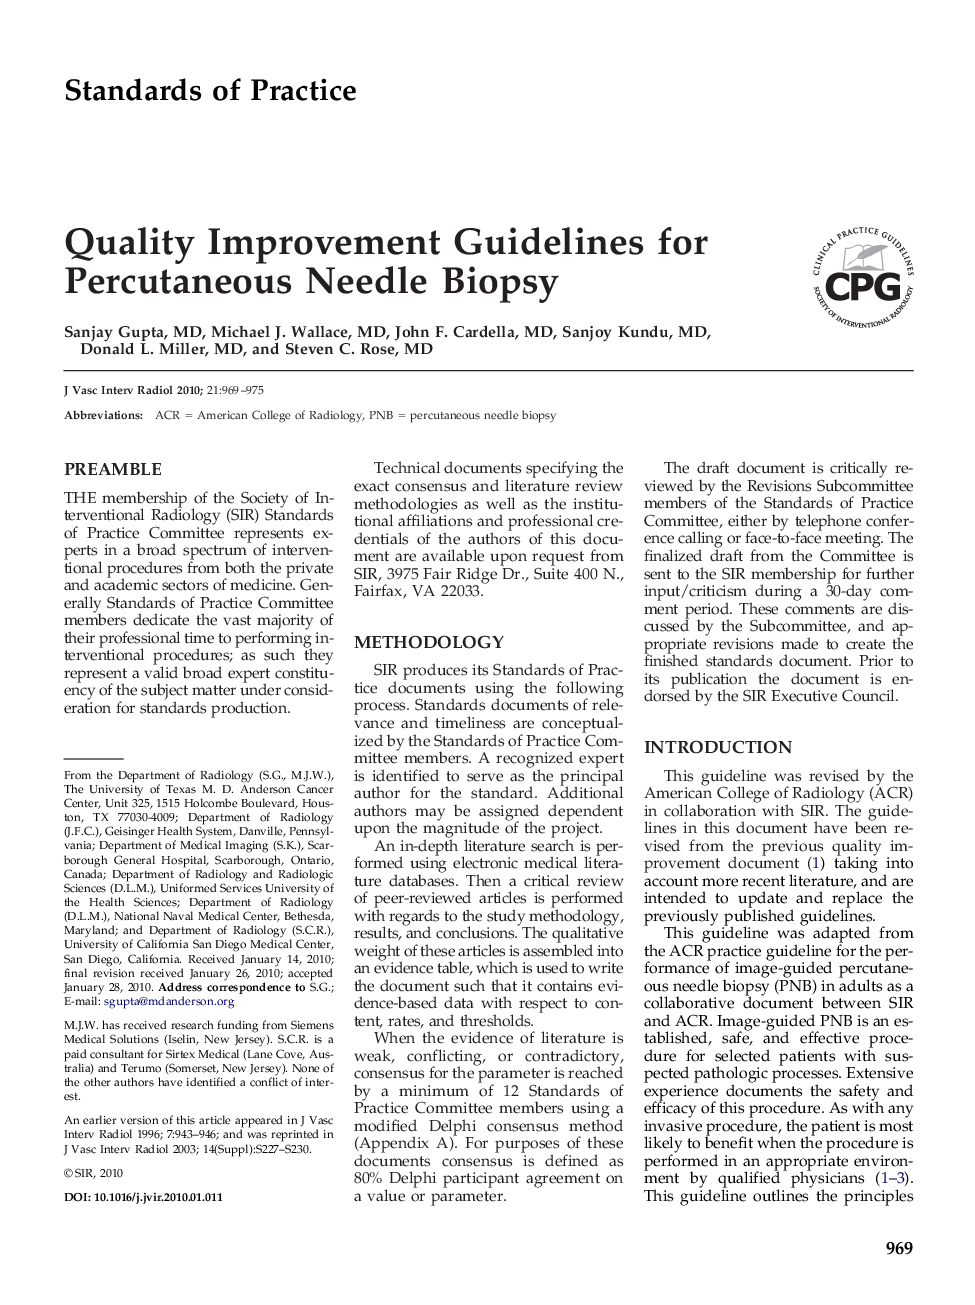 Quality Improvement Guidelines for Percutaneous Needle Biopsy